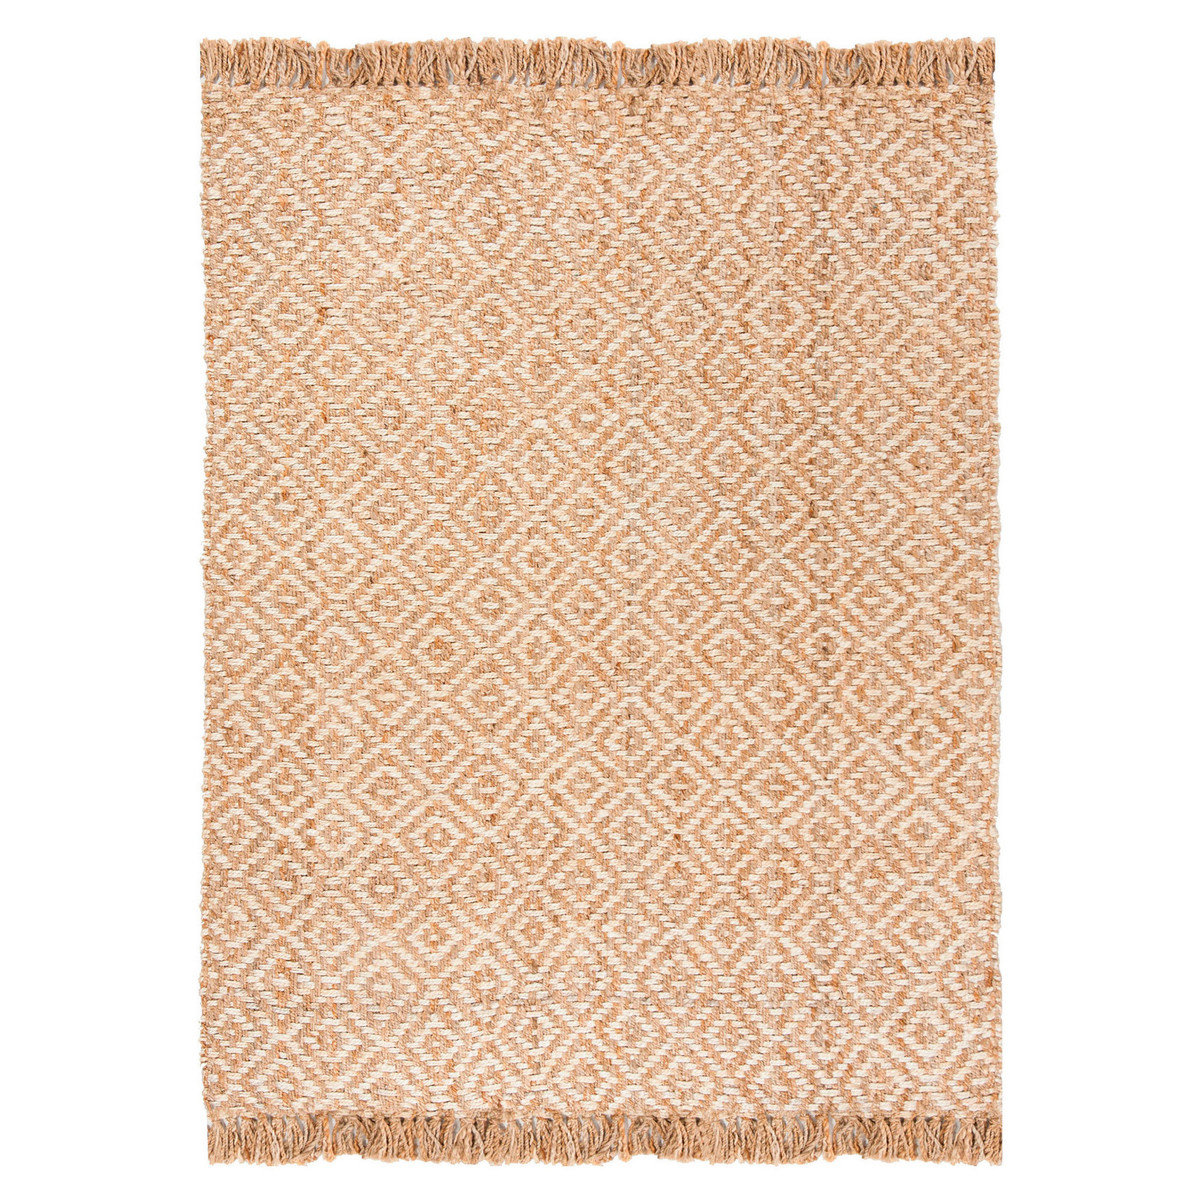 Dom Dywany Conceptum 00017A  - Natural (90 x 150) Naturalne